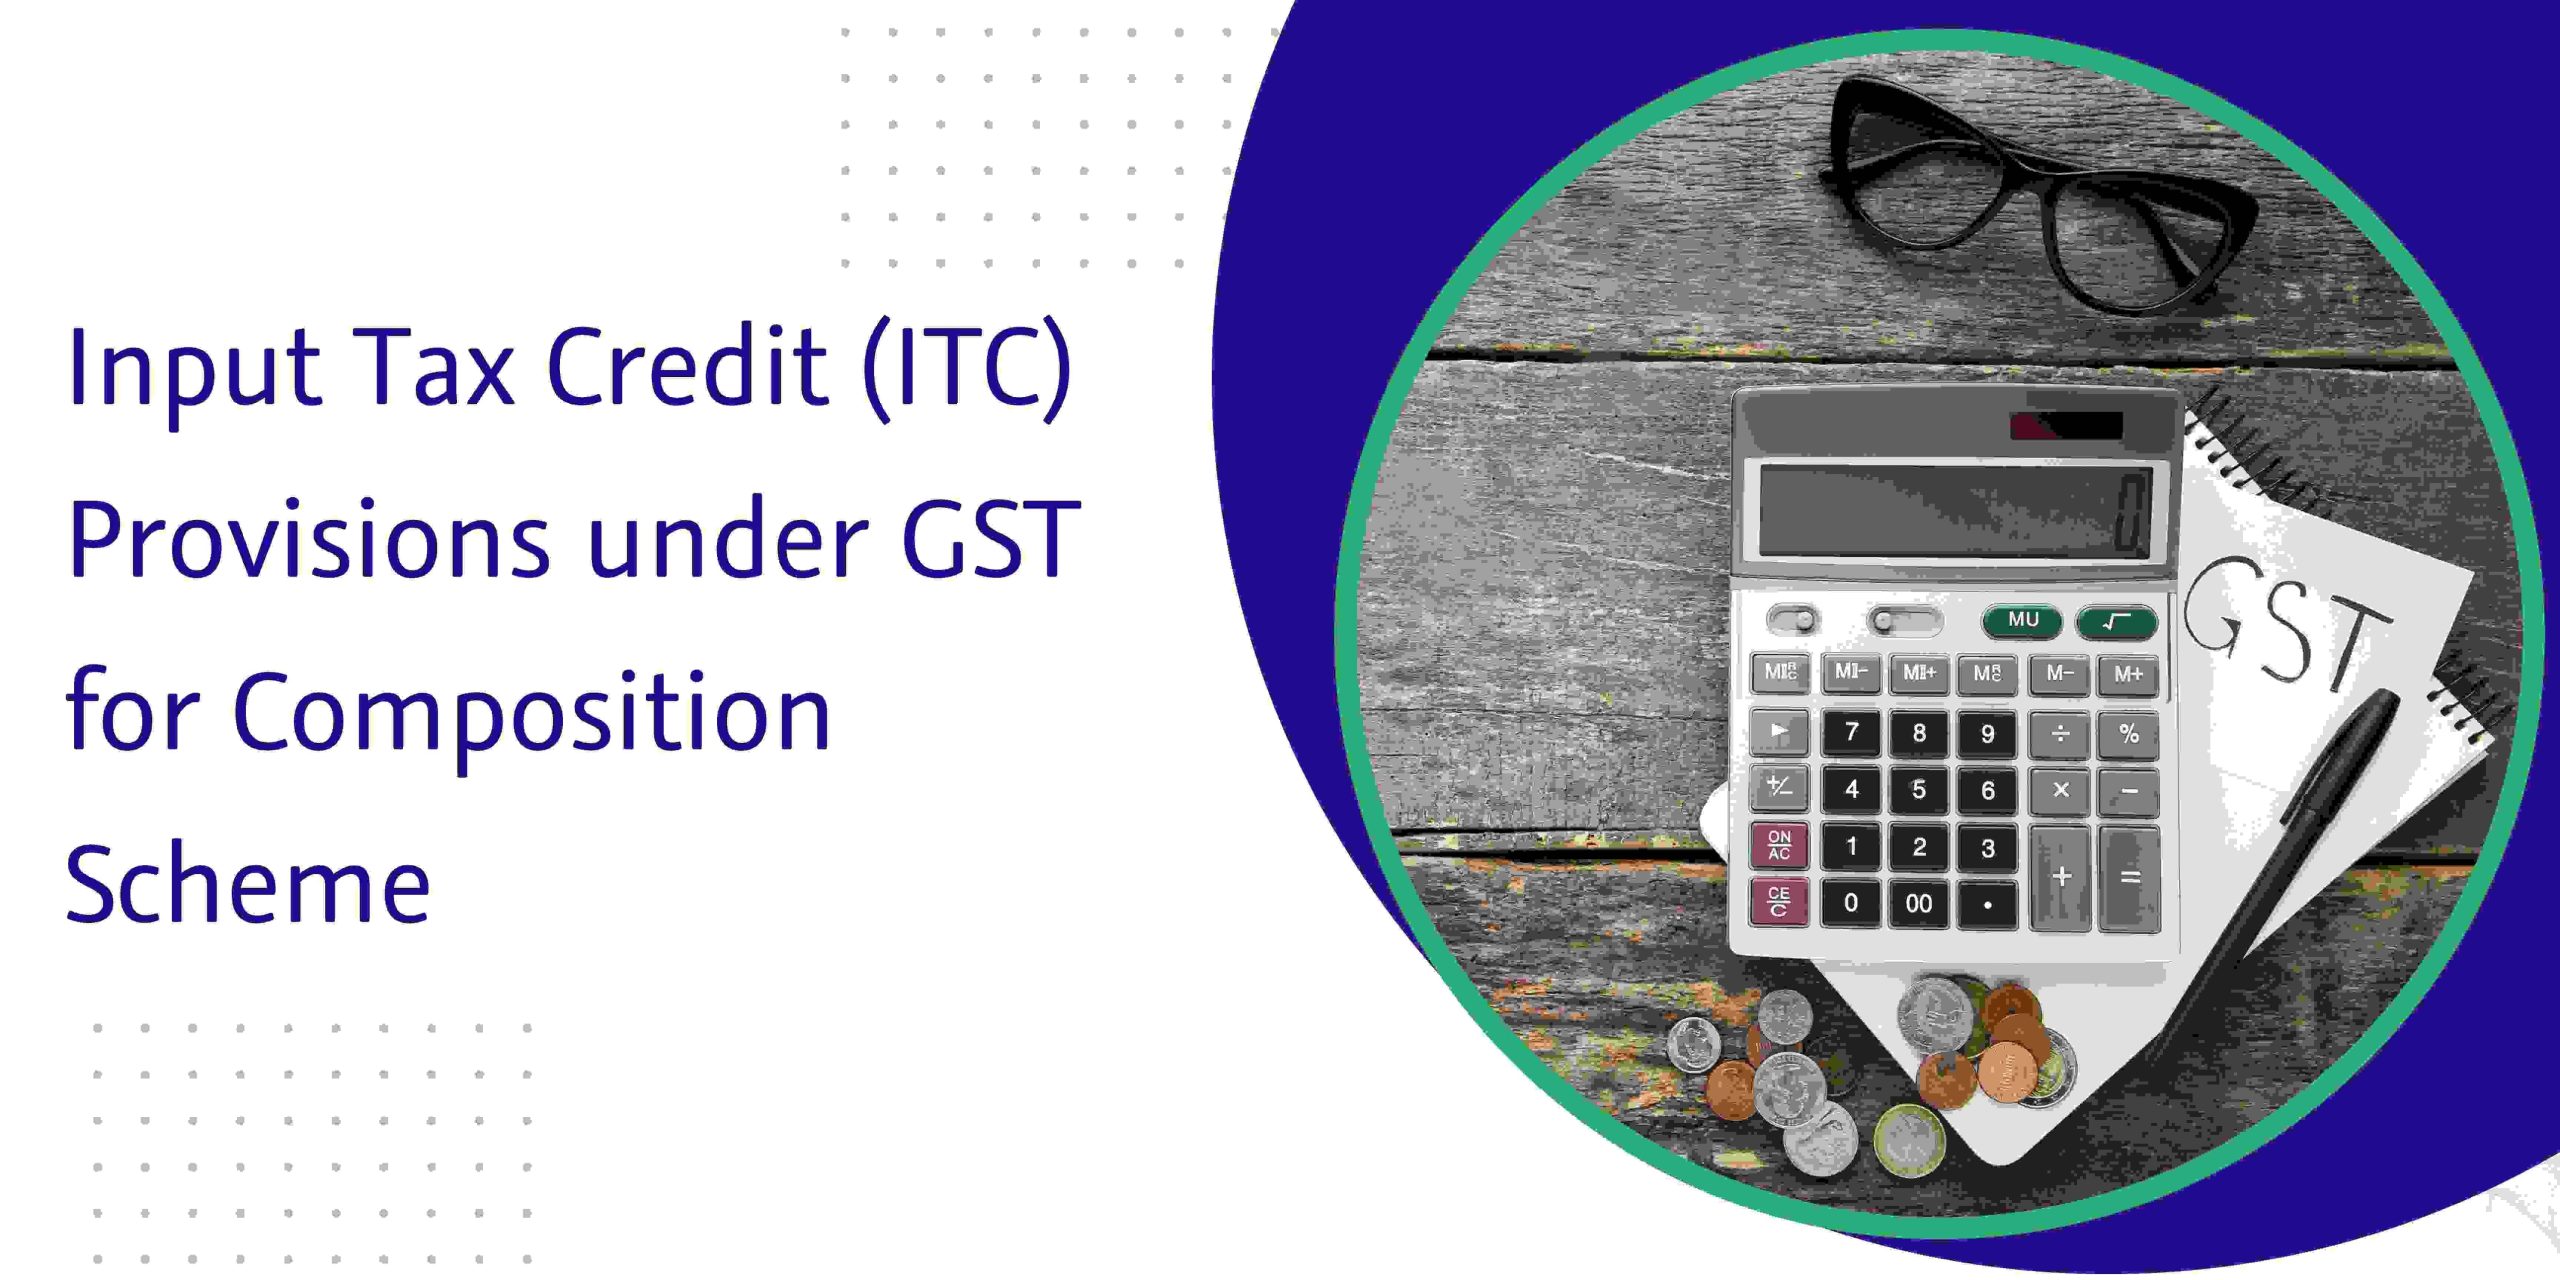 You are currently viewing Input Tax Credit (ITC) Provisions in GSTR-4